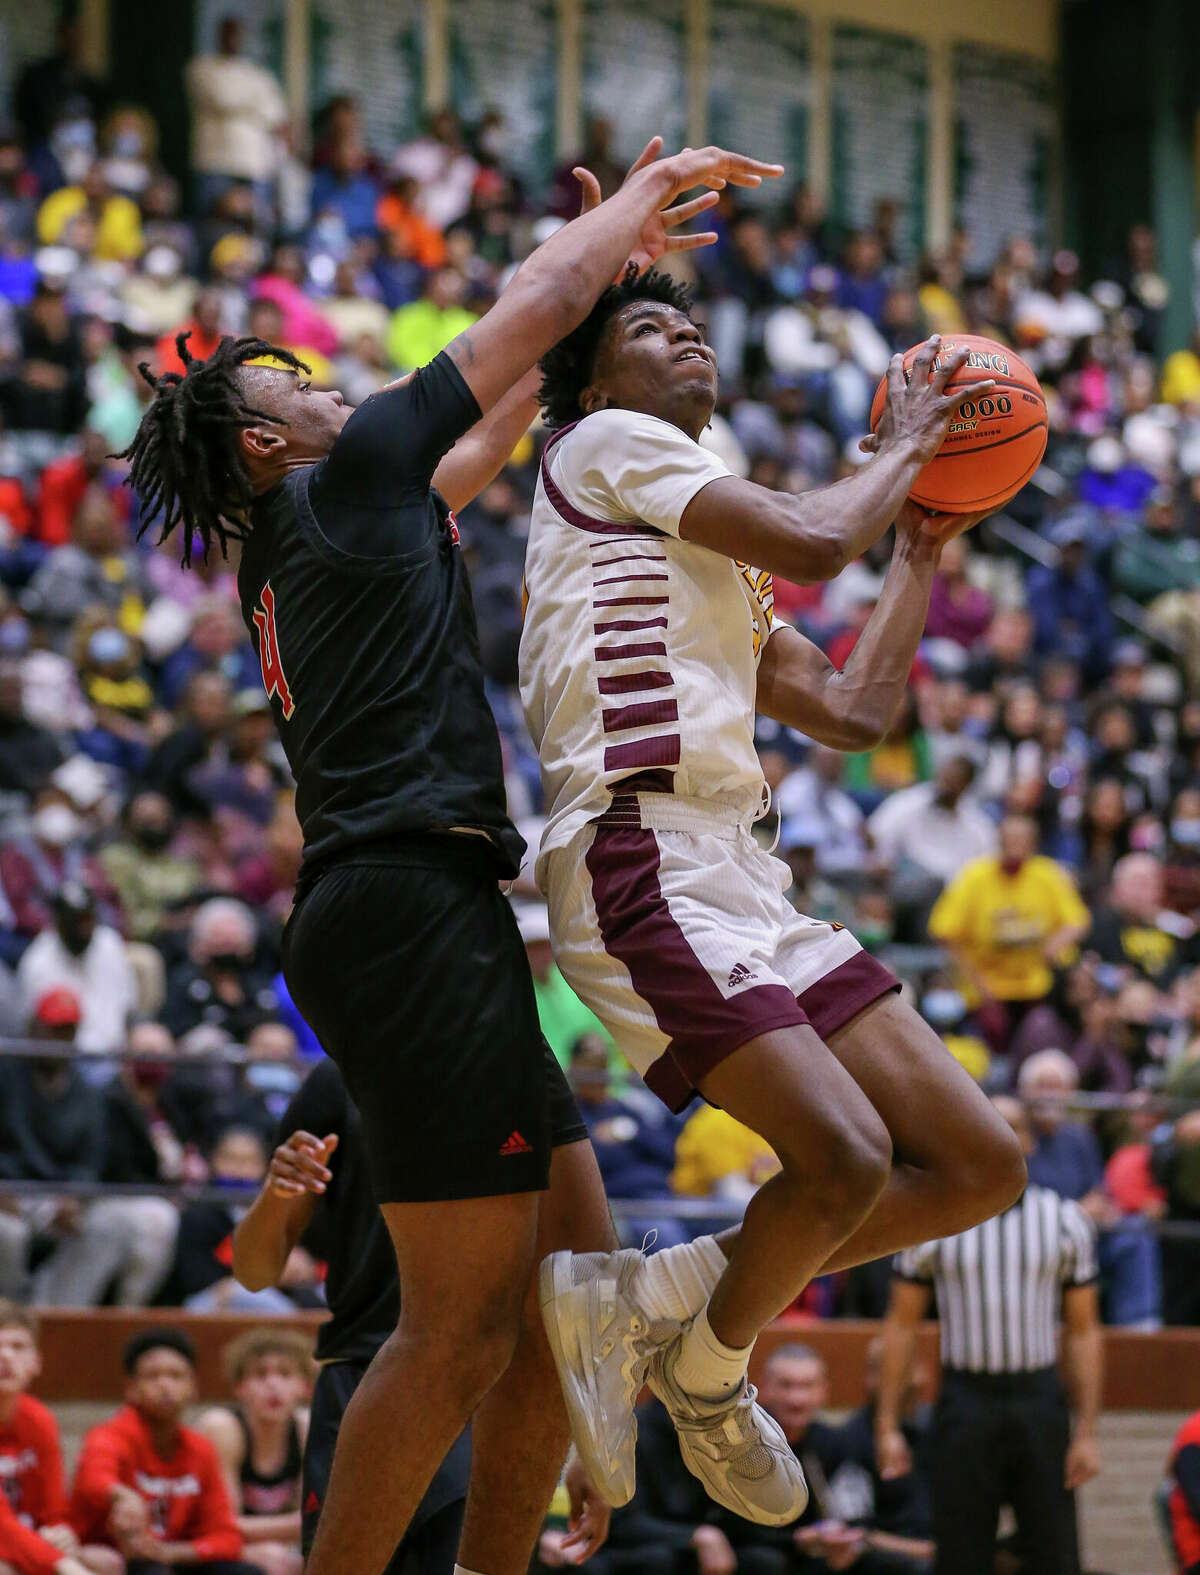 Beaumont United forward Terrance Arceneaux (23) squeezes past a Goose Creek defender for a basket Tuesday night at East Chambers High School in Winnie, TX. Photo taken March 1, 2022 by Jarrod Brown